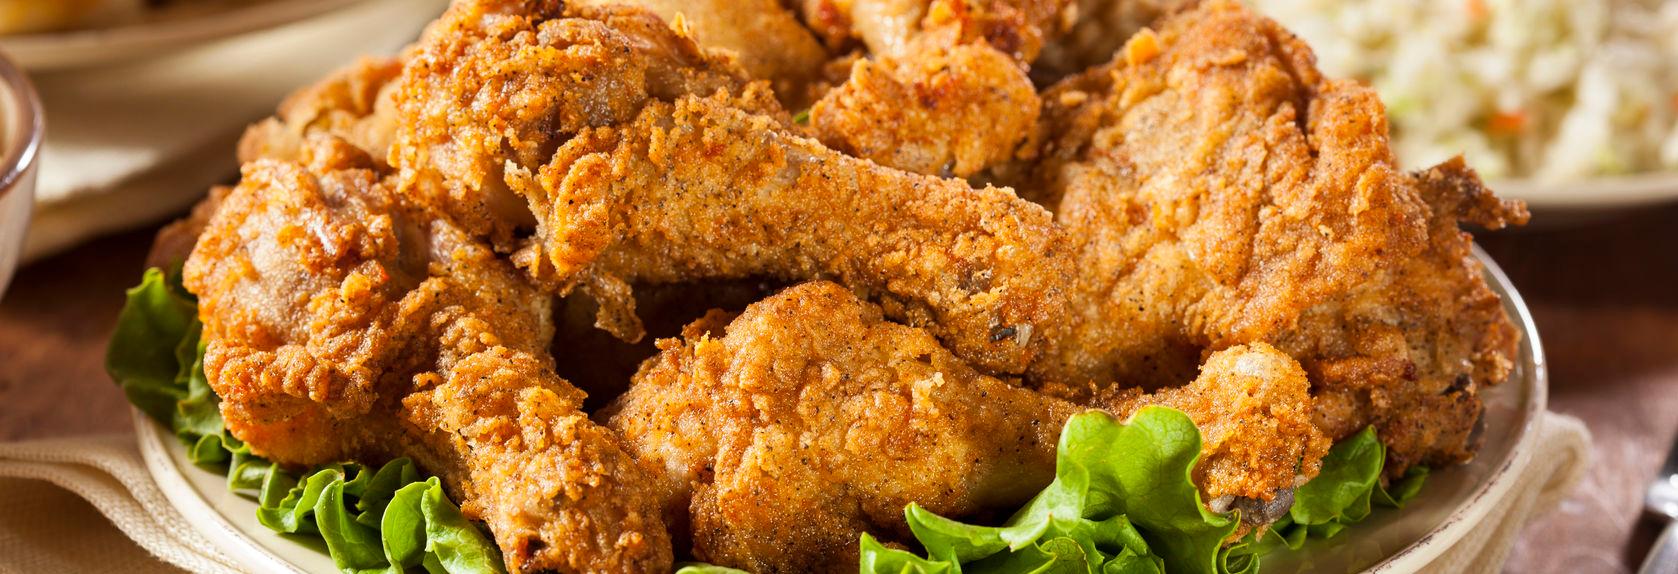 Kennedy Fried Chicken in Fords, NJ - Local Coupons August 10, 2018